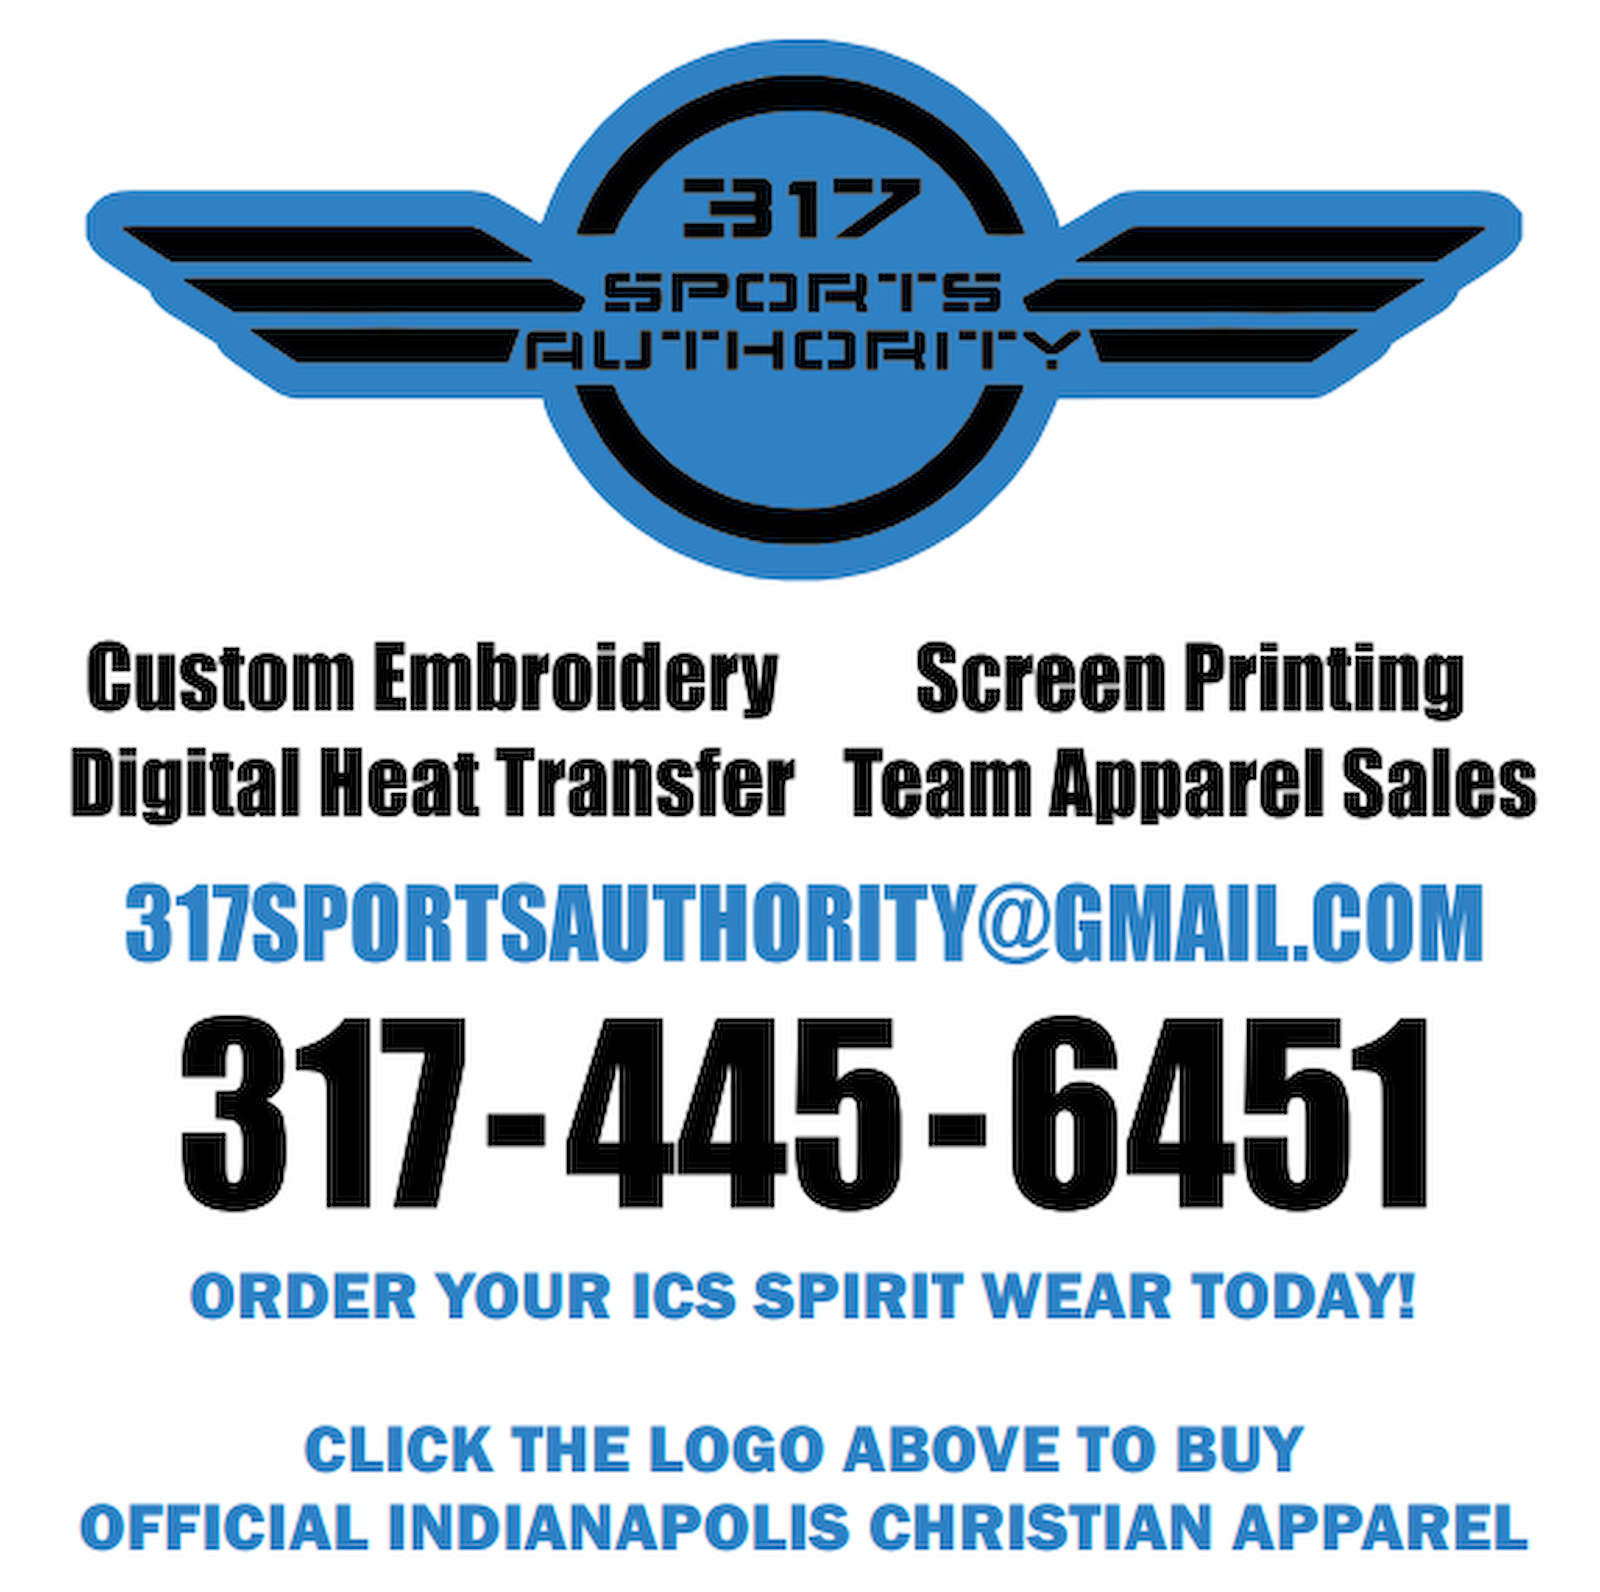 In Partnership with 317 Sports Authority